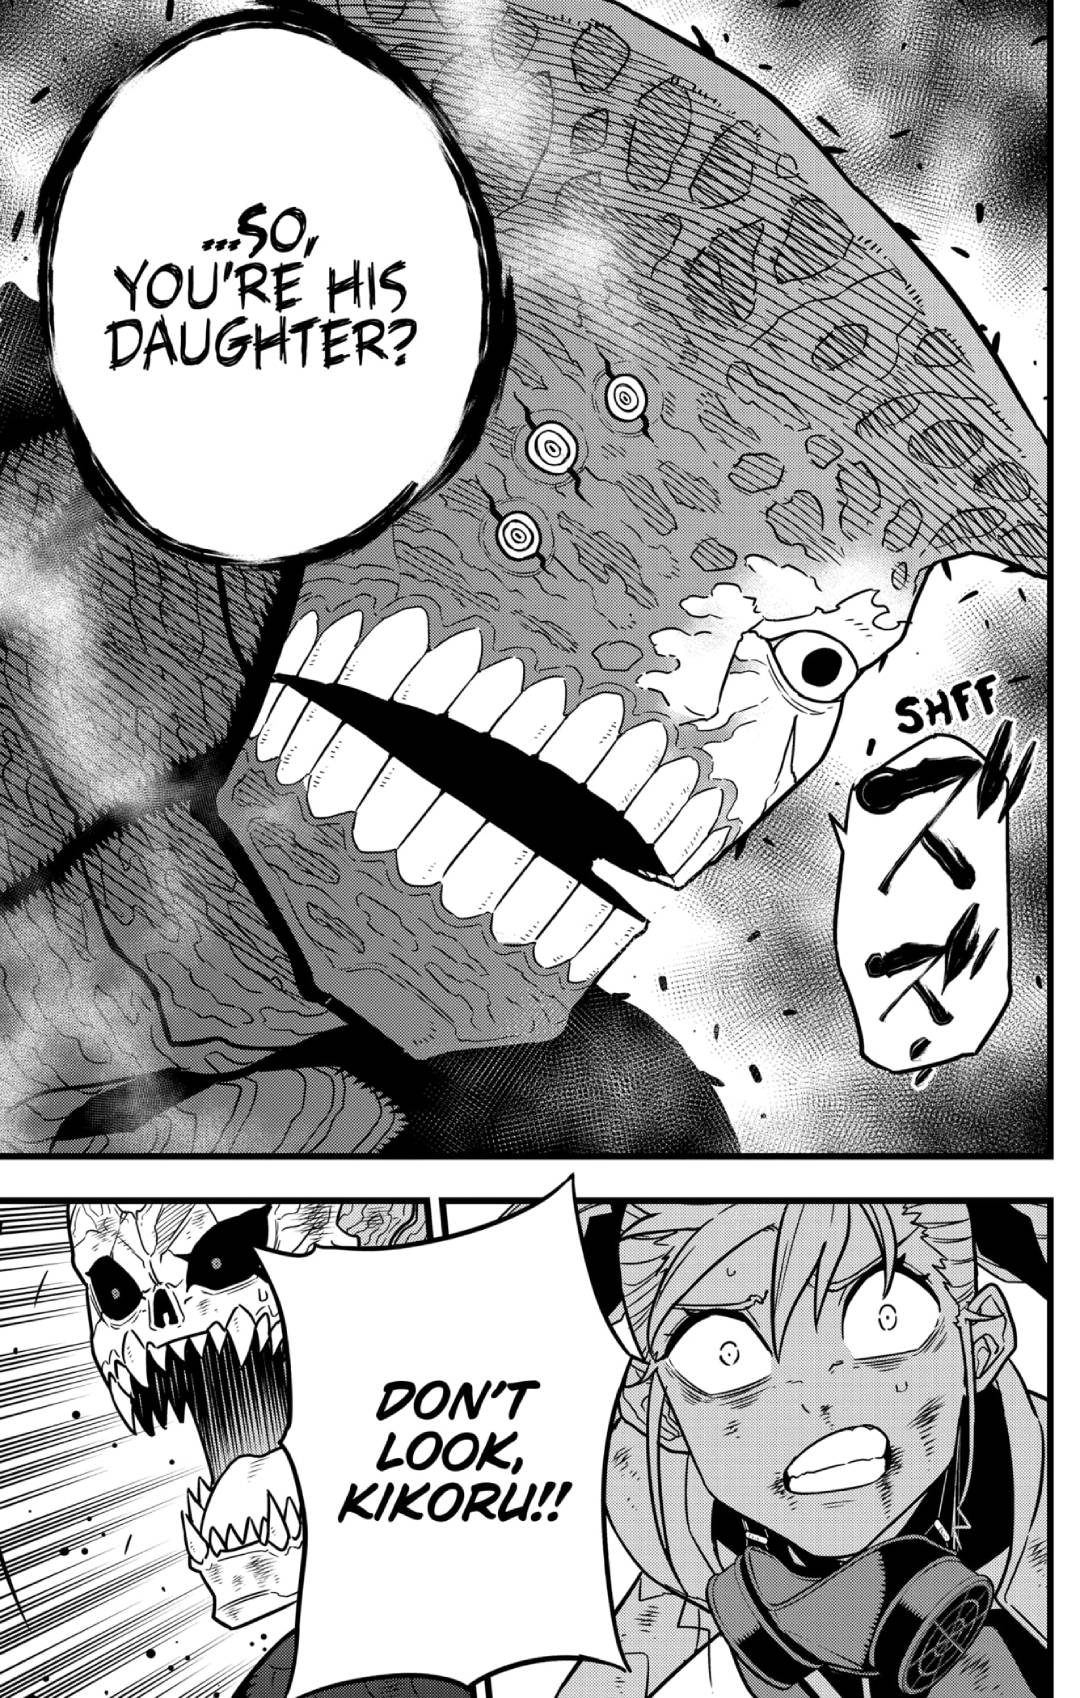 Kaiju no 8 Chapter 52, monster #8 chapter 52